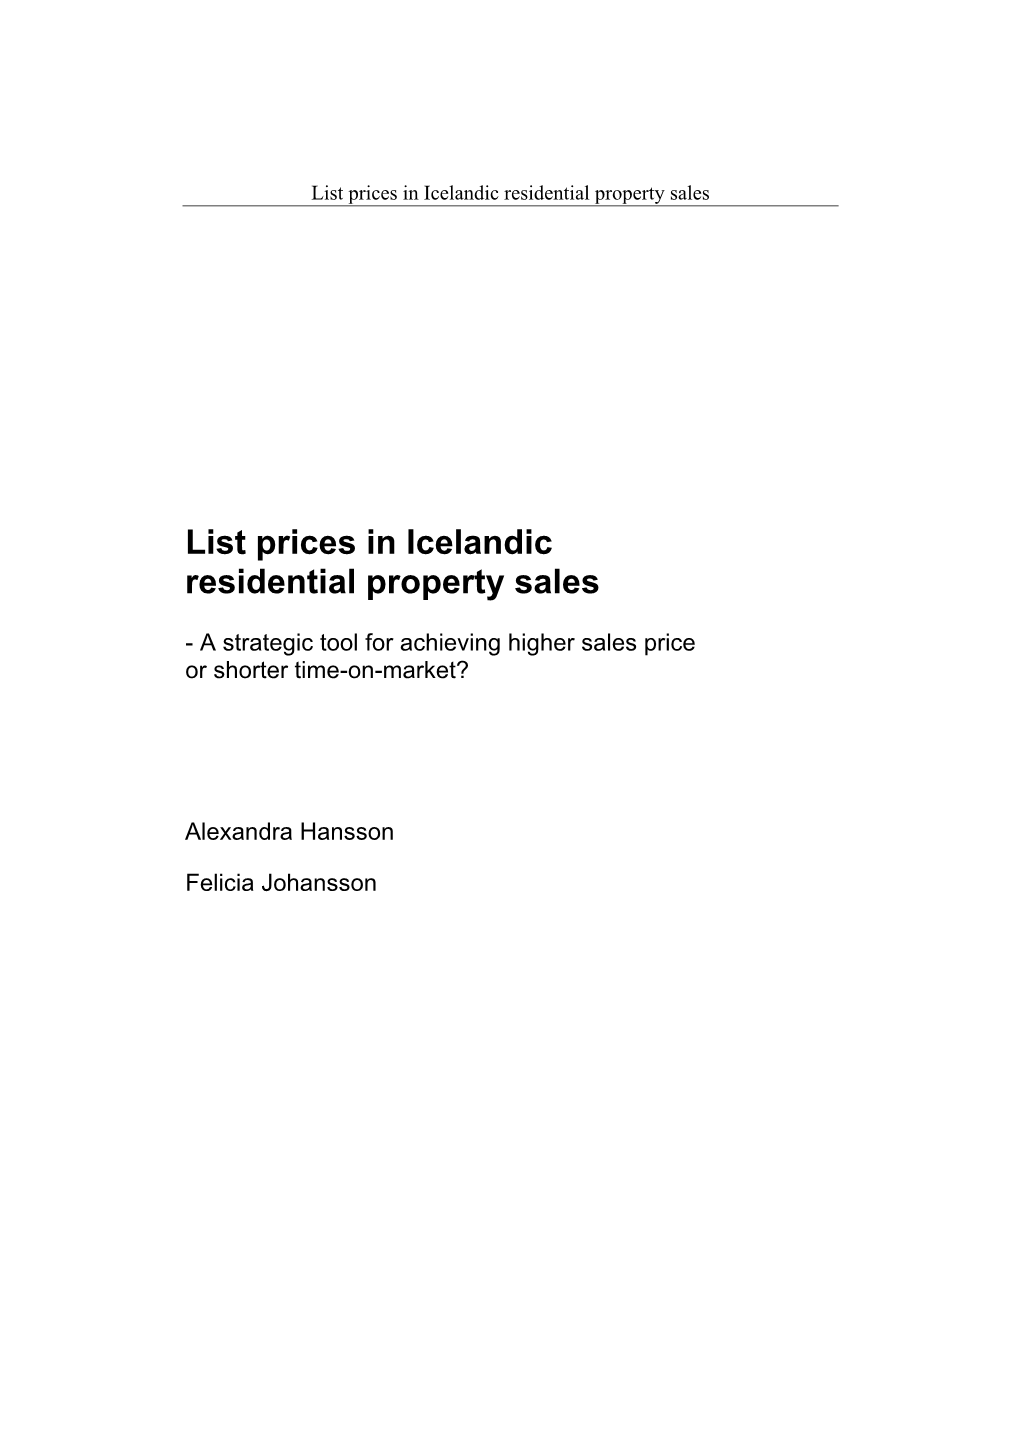 List Prices in Icelandic Residential Property Sales